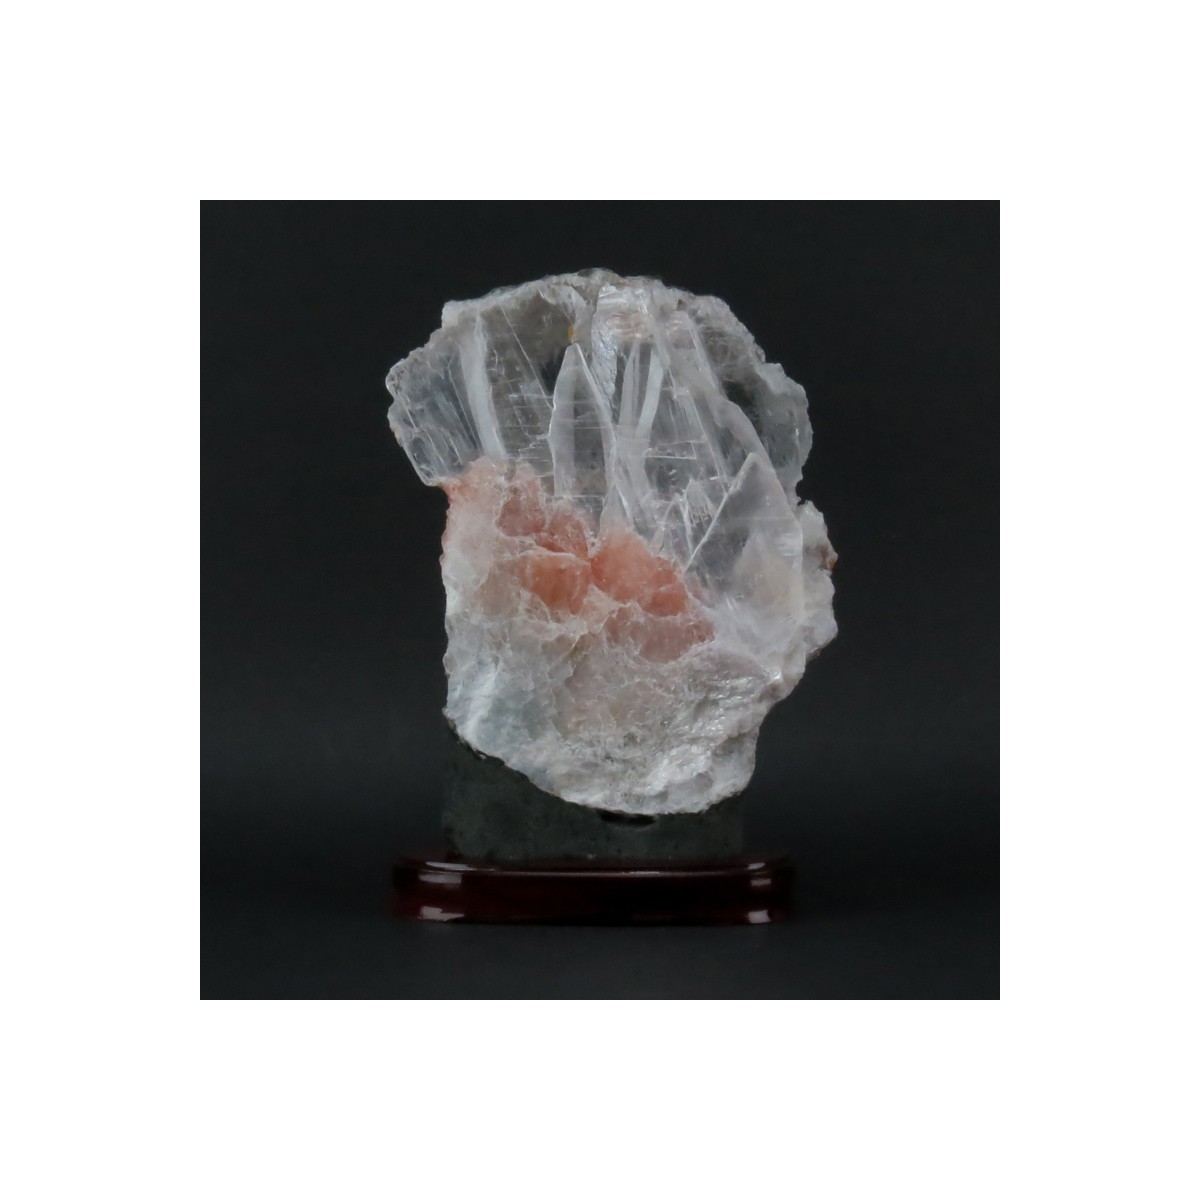 Rock Quartz Lapidary Specimen on Wooden Stand. Clear to rose color shades and various structures. N